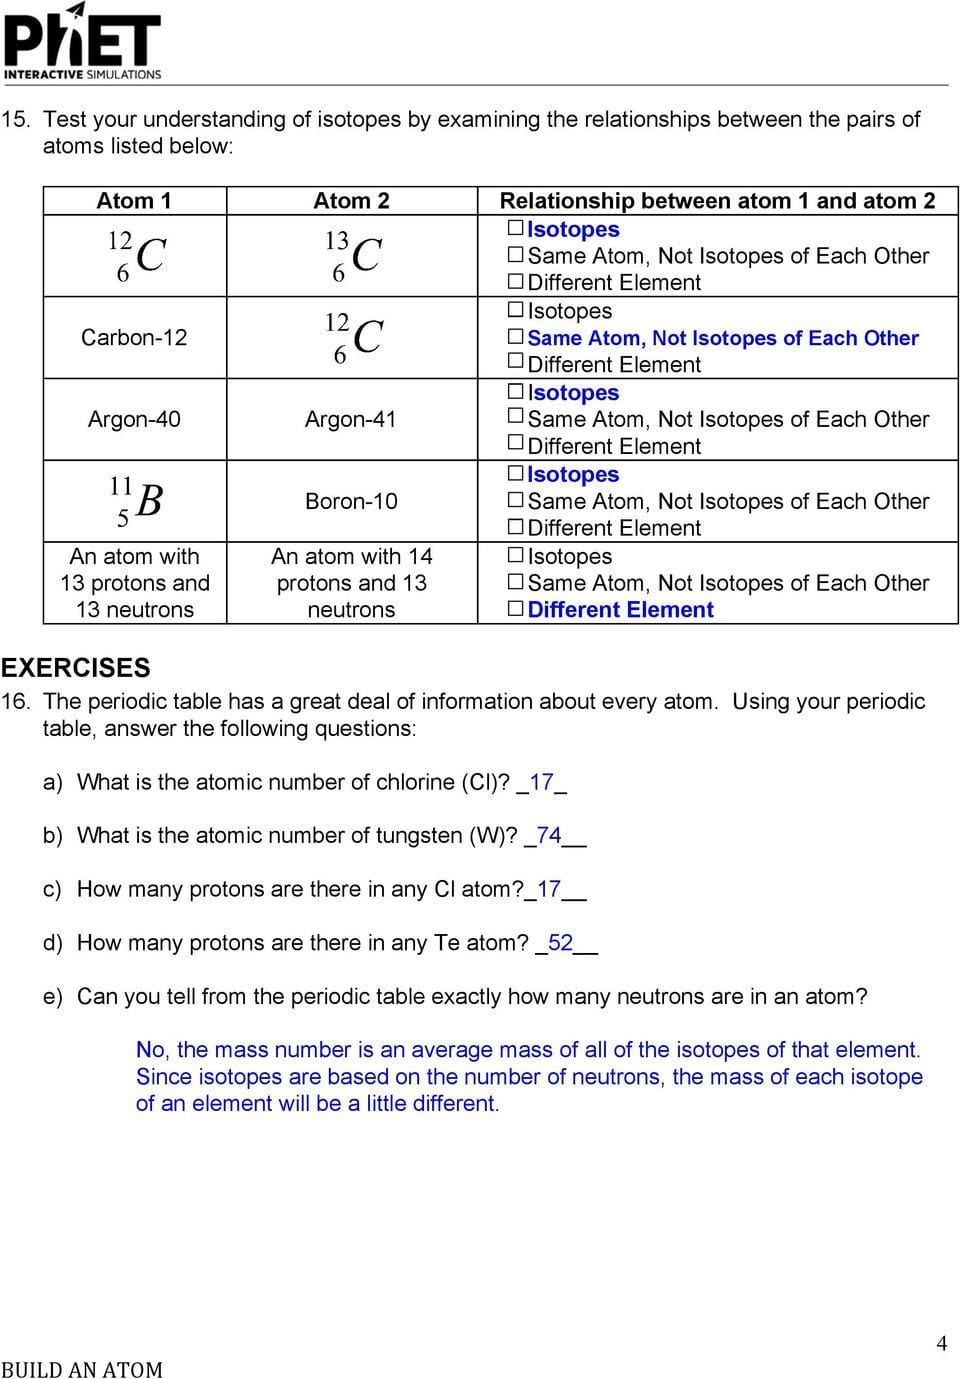 chapter-1-section-2-the-nature-of-science-worksheet-answers-db-excel